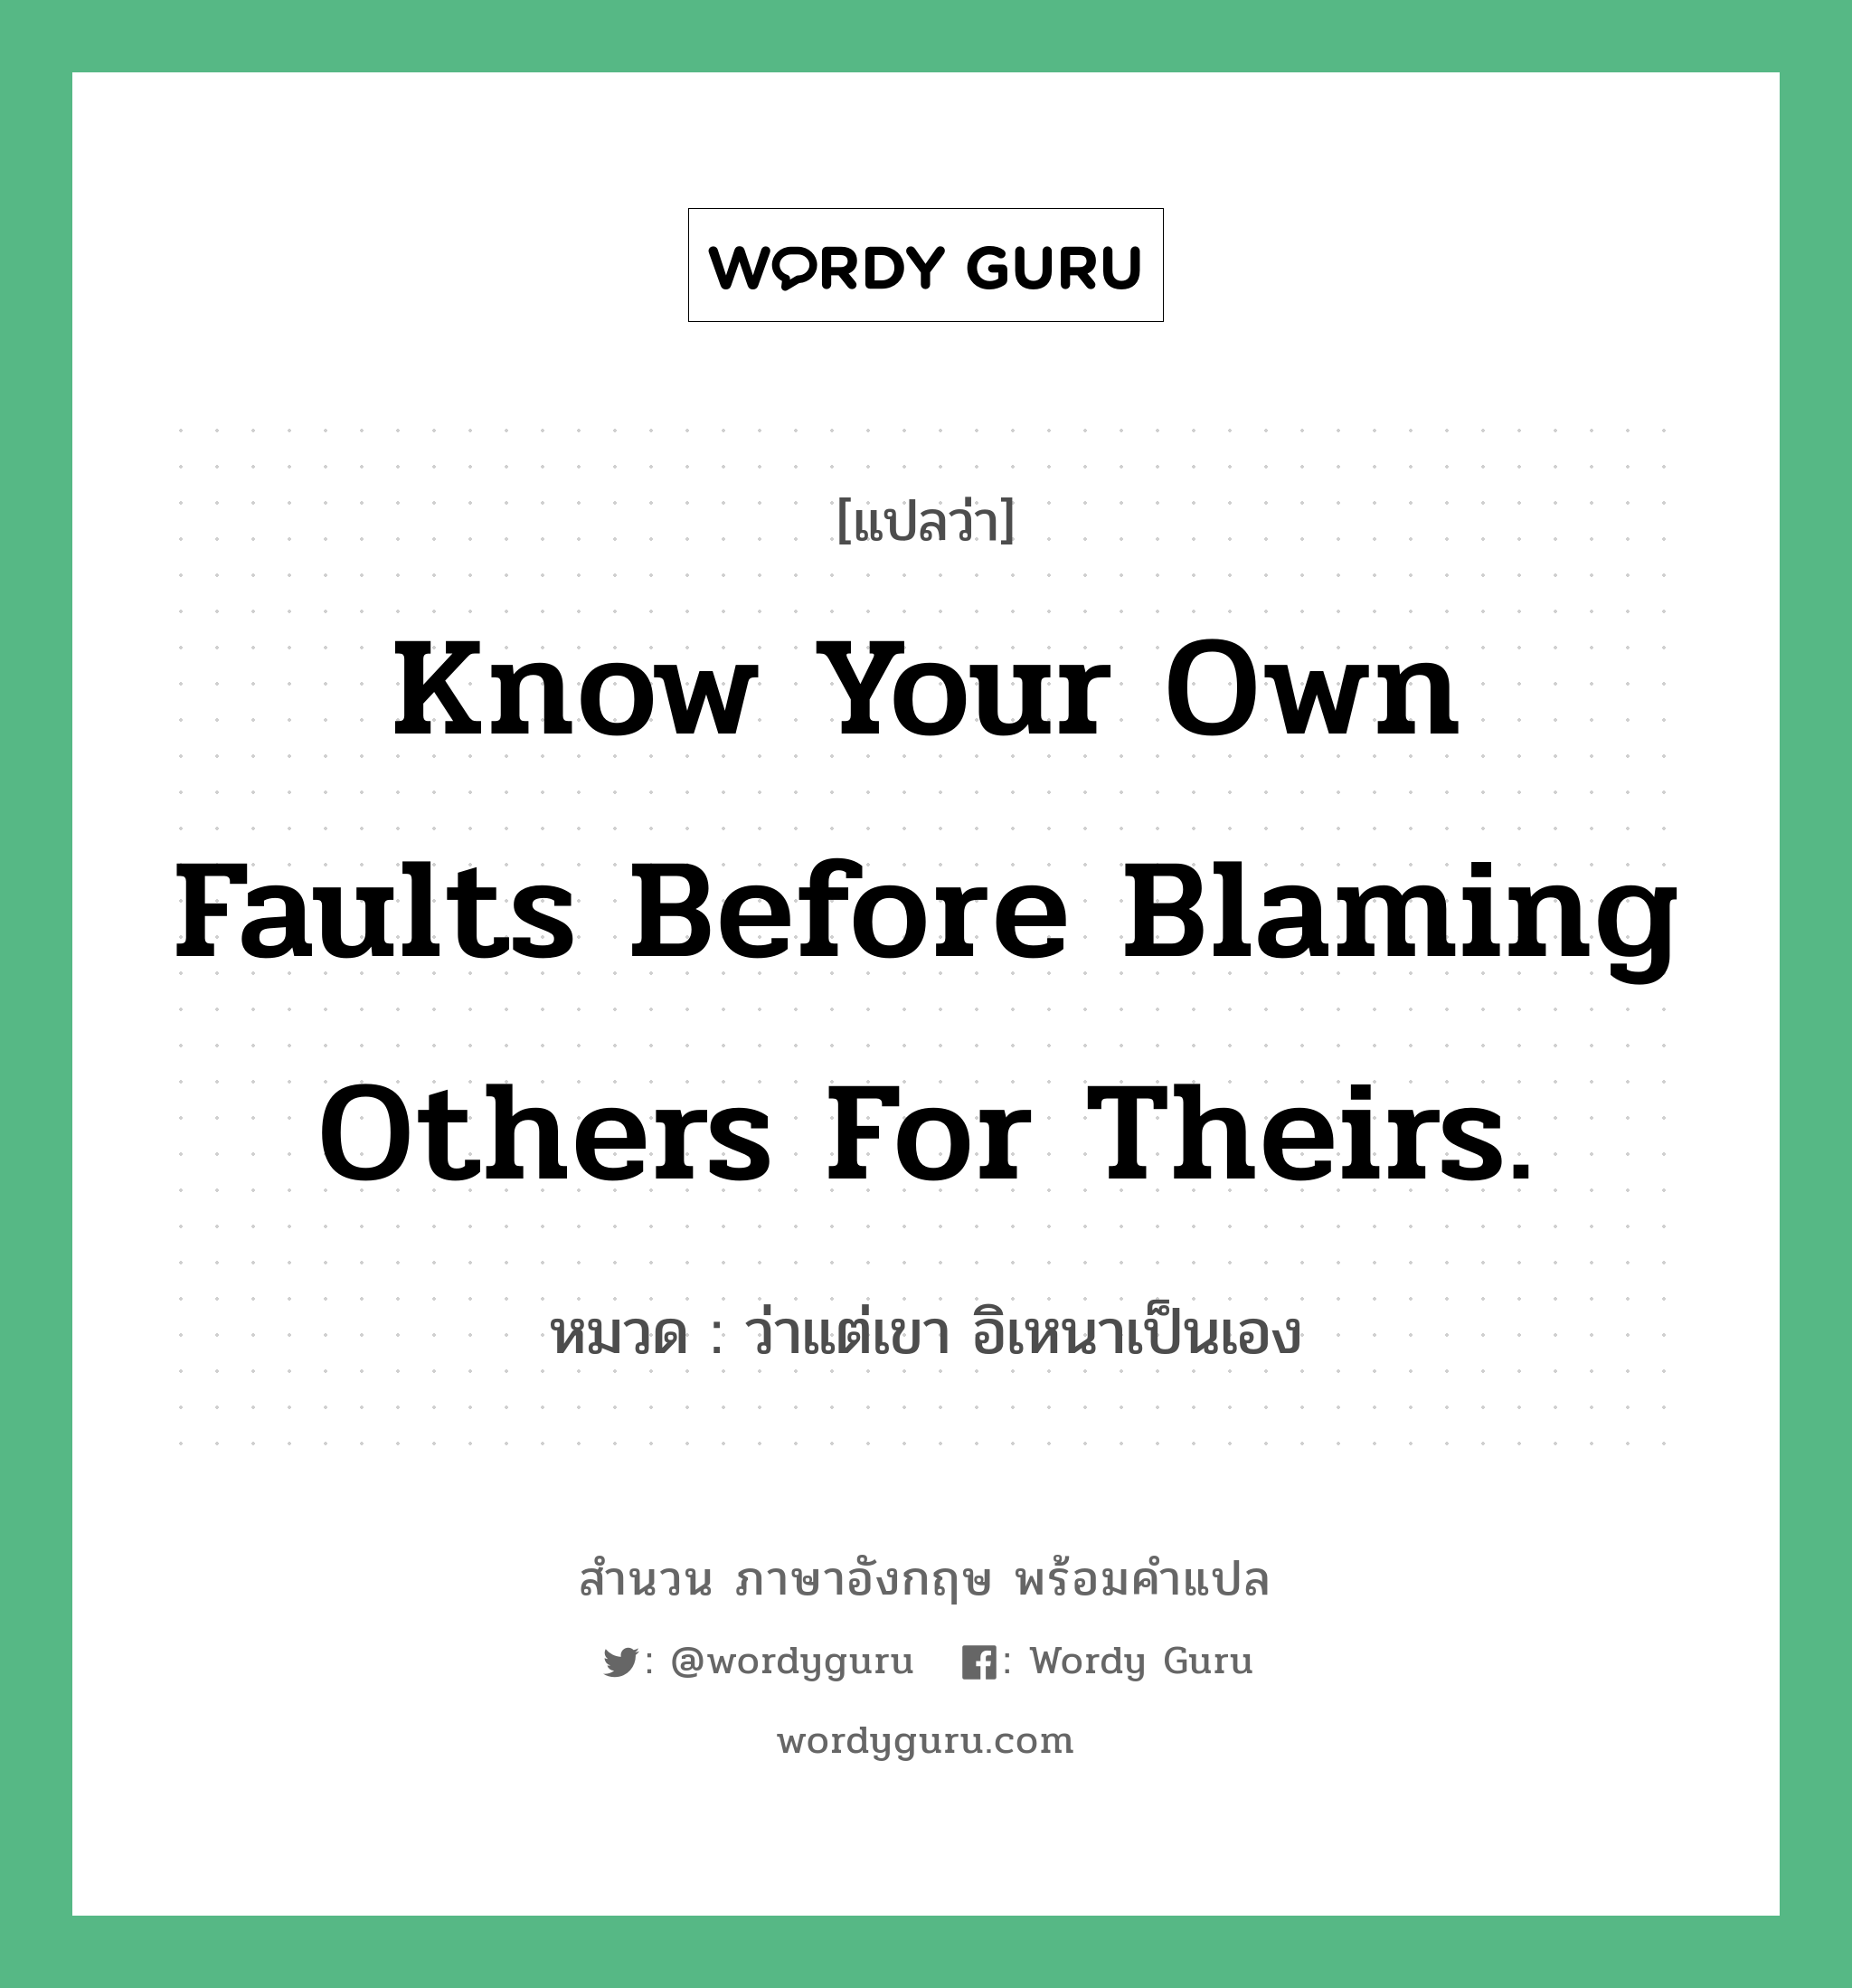 Know your own faults before blaming others for theirs. แปลว่า?, สำนวนภาษาอังกฤษ Know your own faults before blaming others for theirs. หมวด ว่าแต่เขา อิเหนาเป็นเอง คำสุภาษิต ภาษาอังกฤษ หมวด คำสุภาษิต ภาษาอังกฤษ